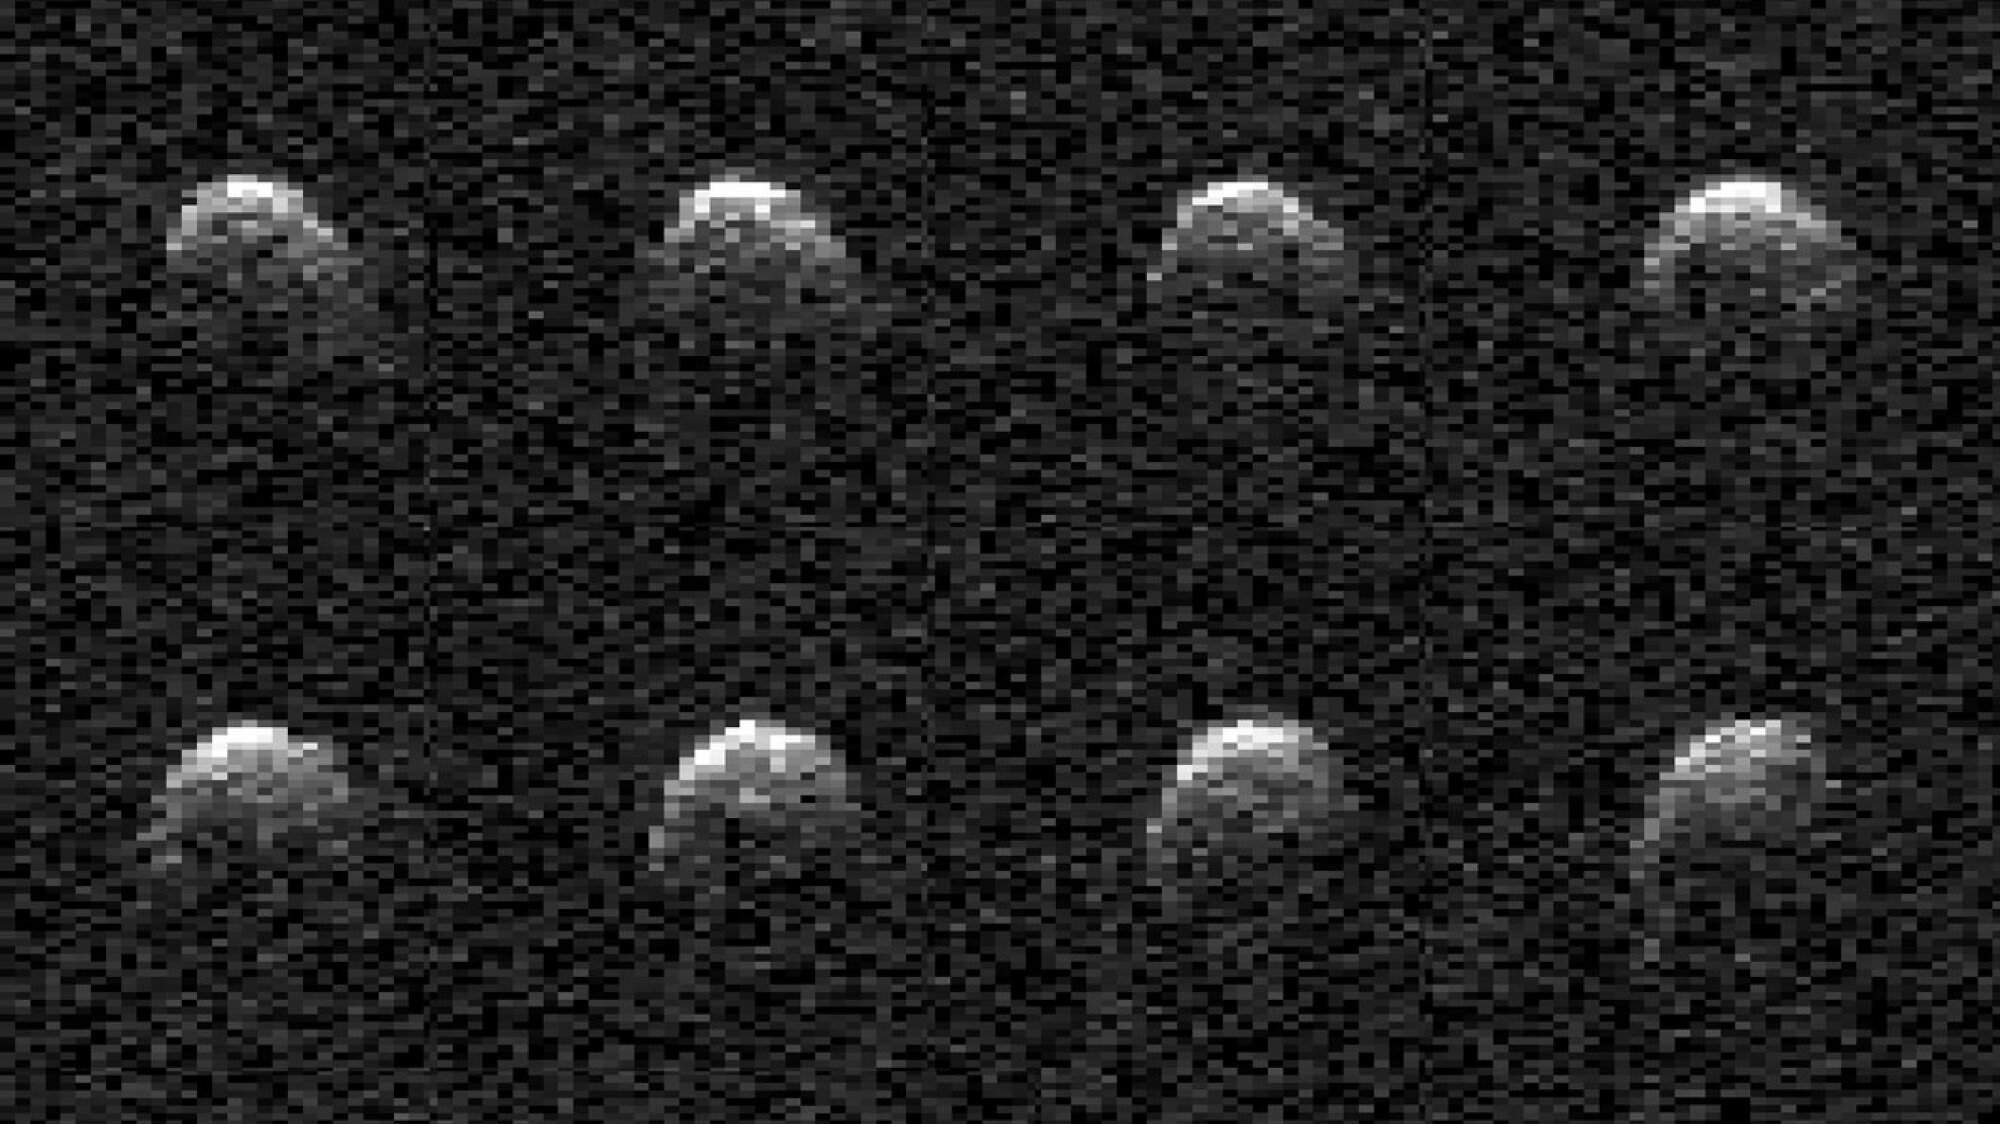 NASA snapped images of the stadium-sized asteroid that swooped by Earth